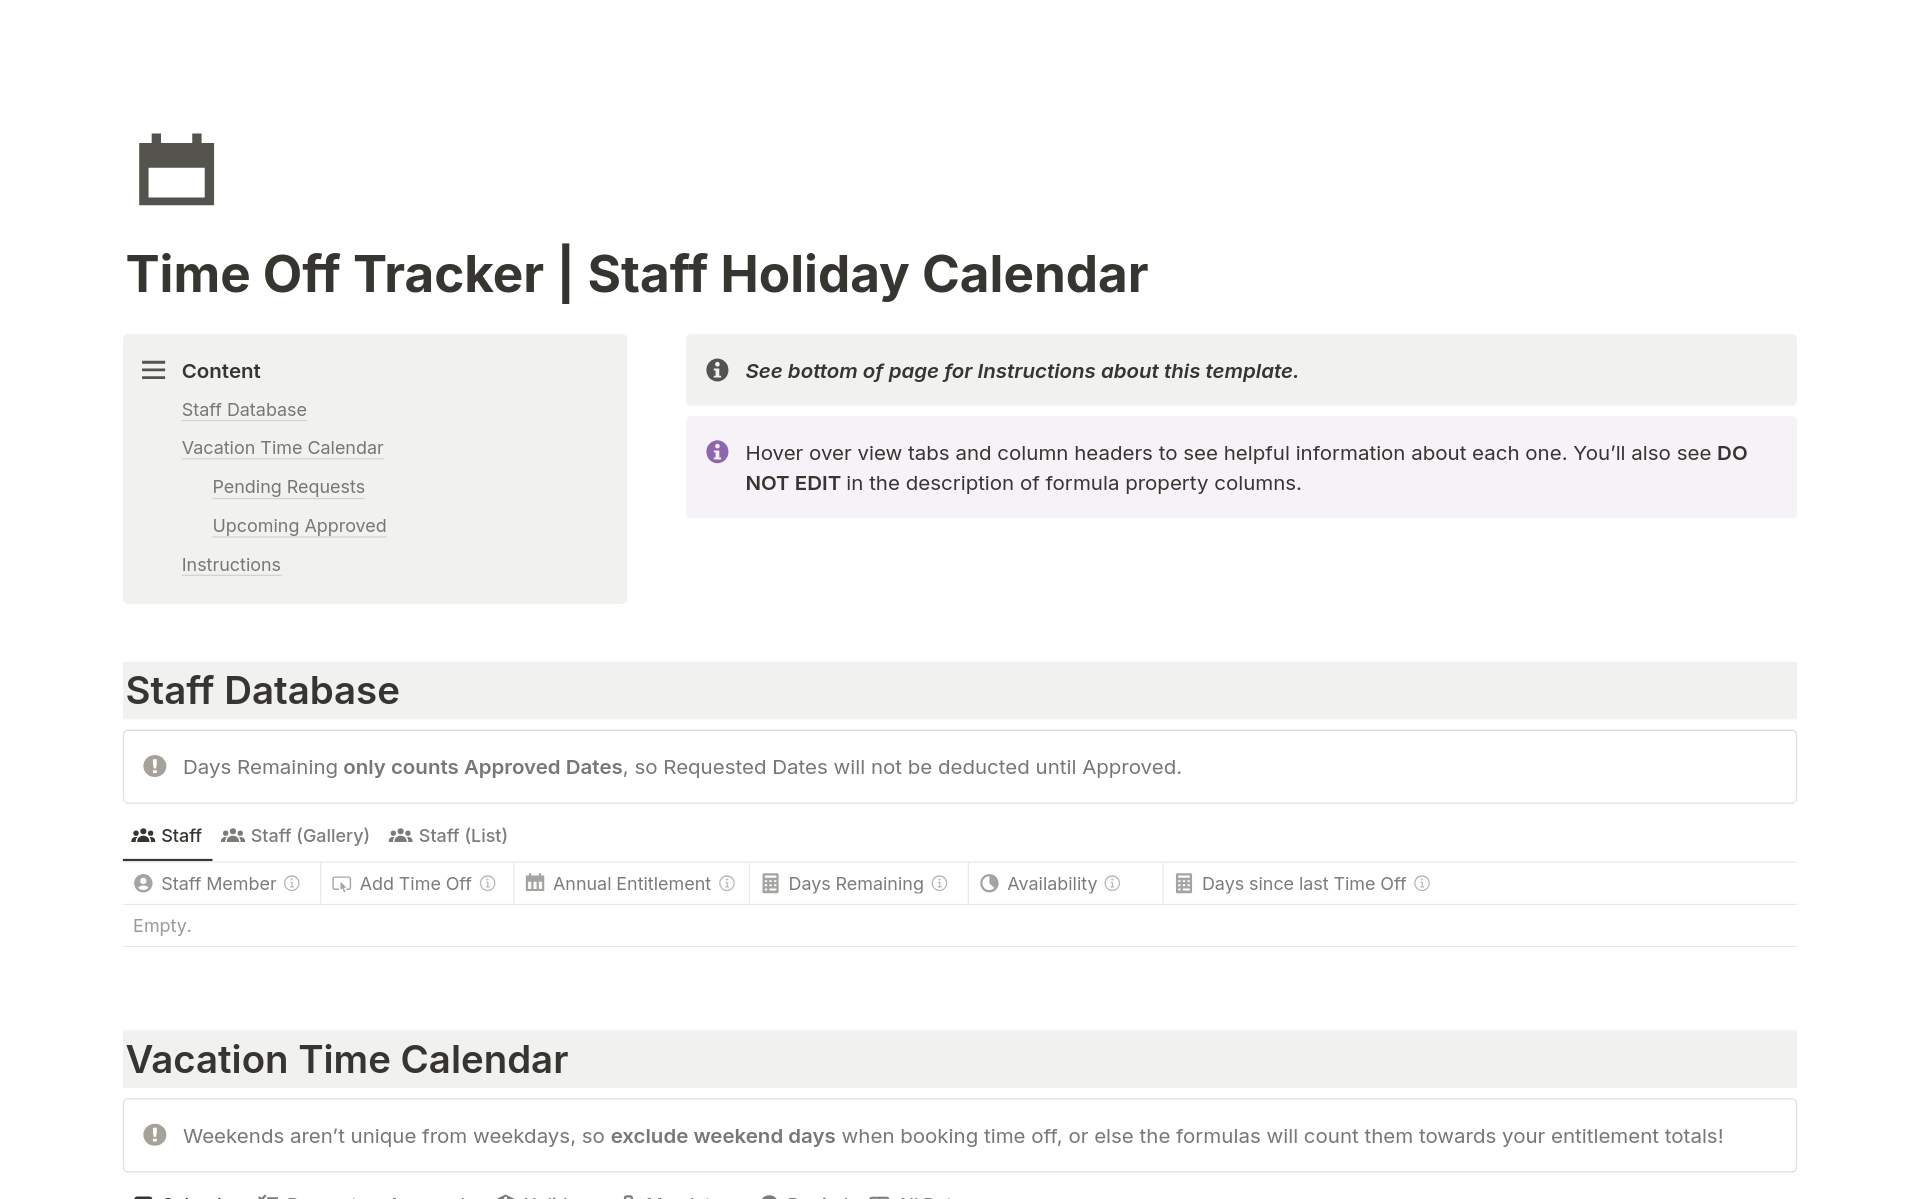 A staff holiday and time off tracker to easily manage leave calendars, request and approve time off, and track annual entitlements and ensure staff are utilizing their PTO. Perfect for small businesses and creative teams.